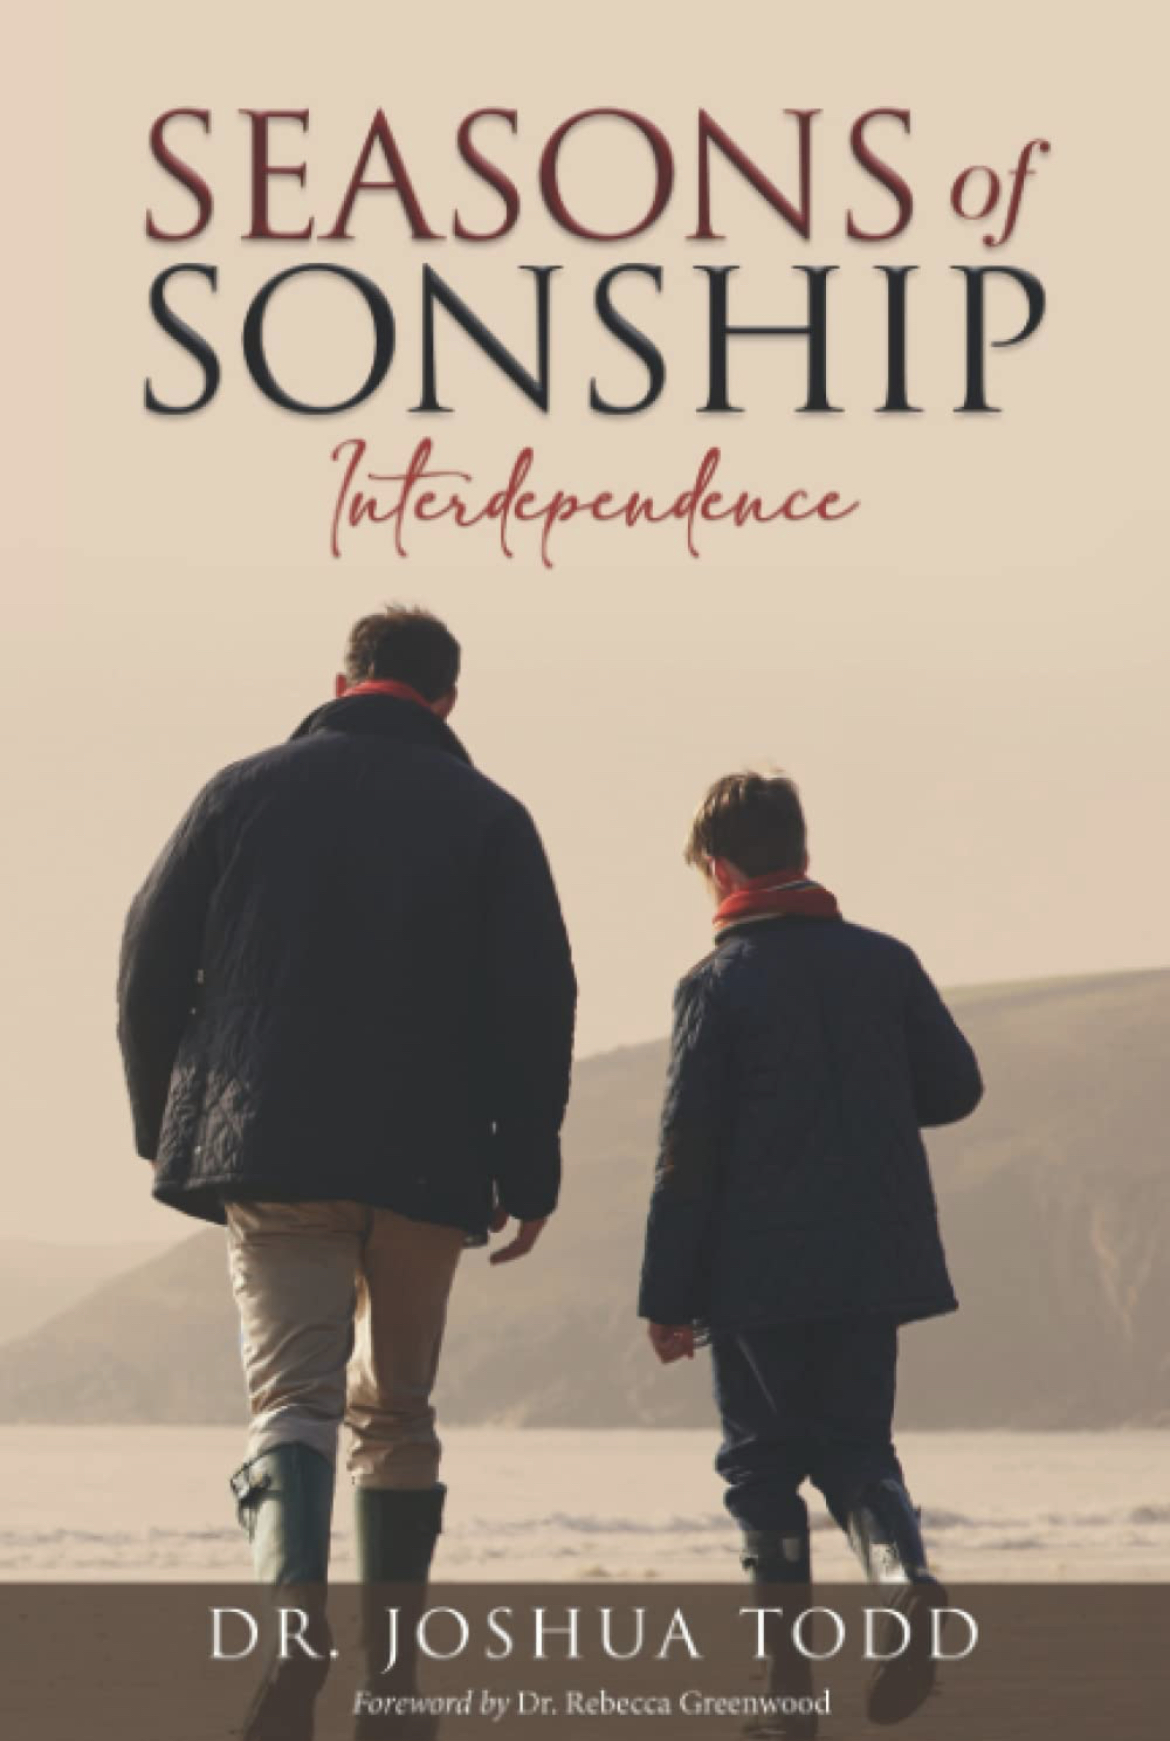 Seasons of Sonship Book 3 - Interdependence